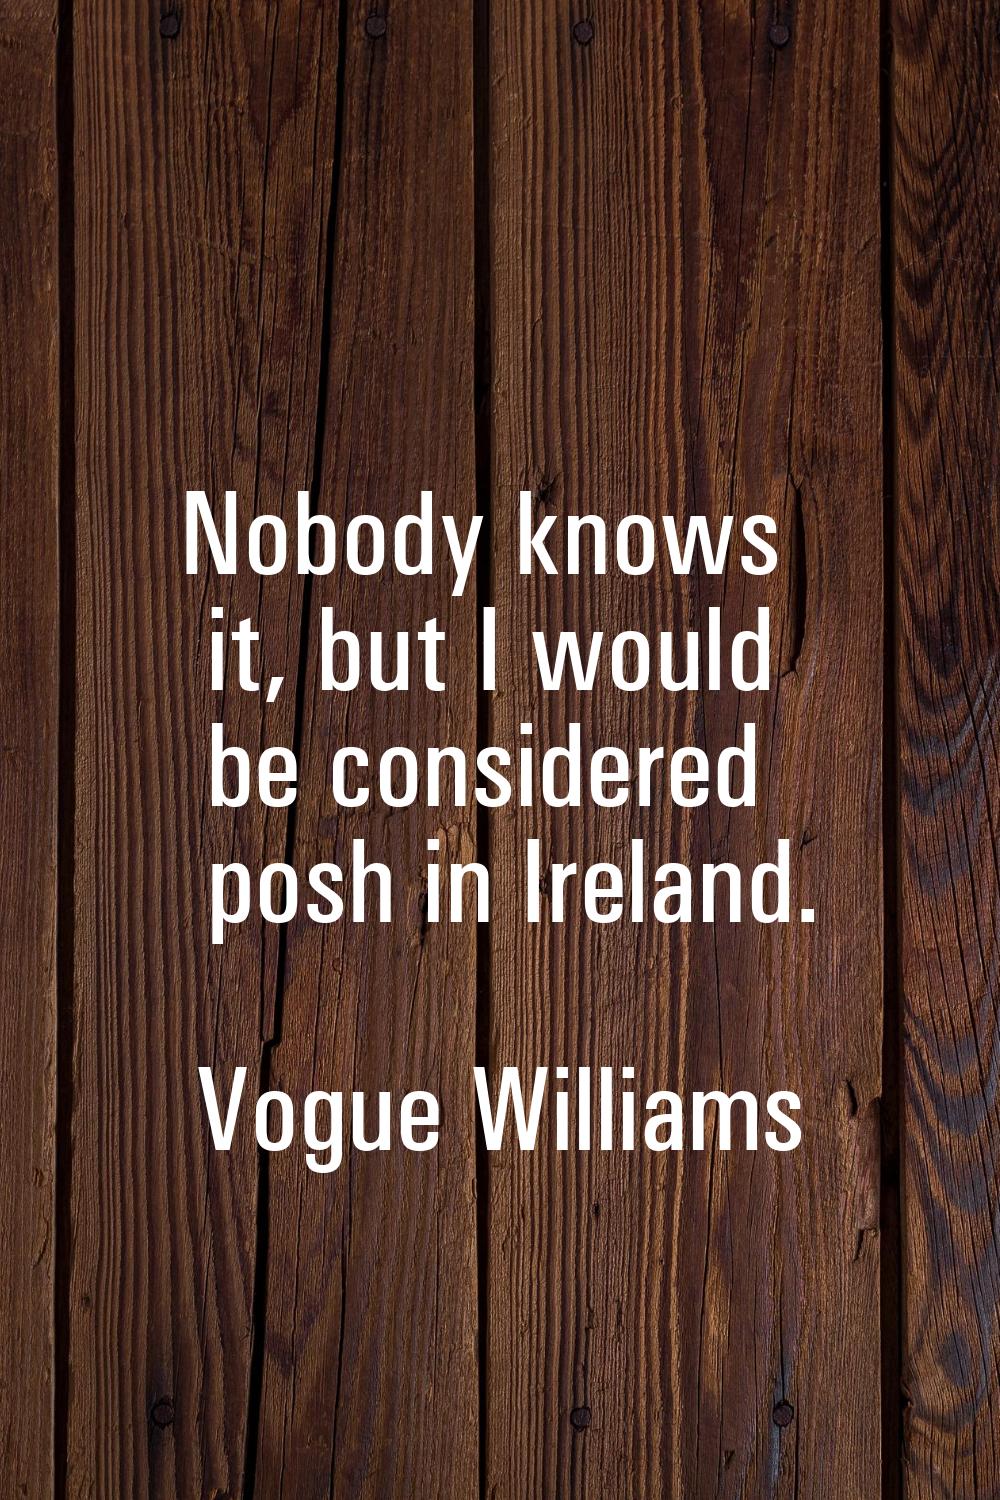 Nobody knows it, but I would be considered posh in Ireland.